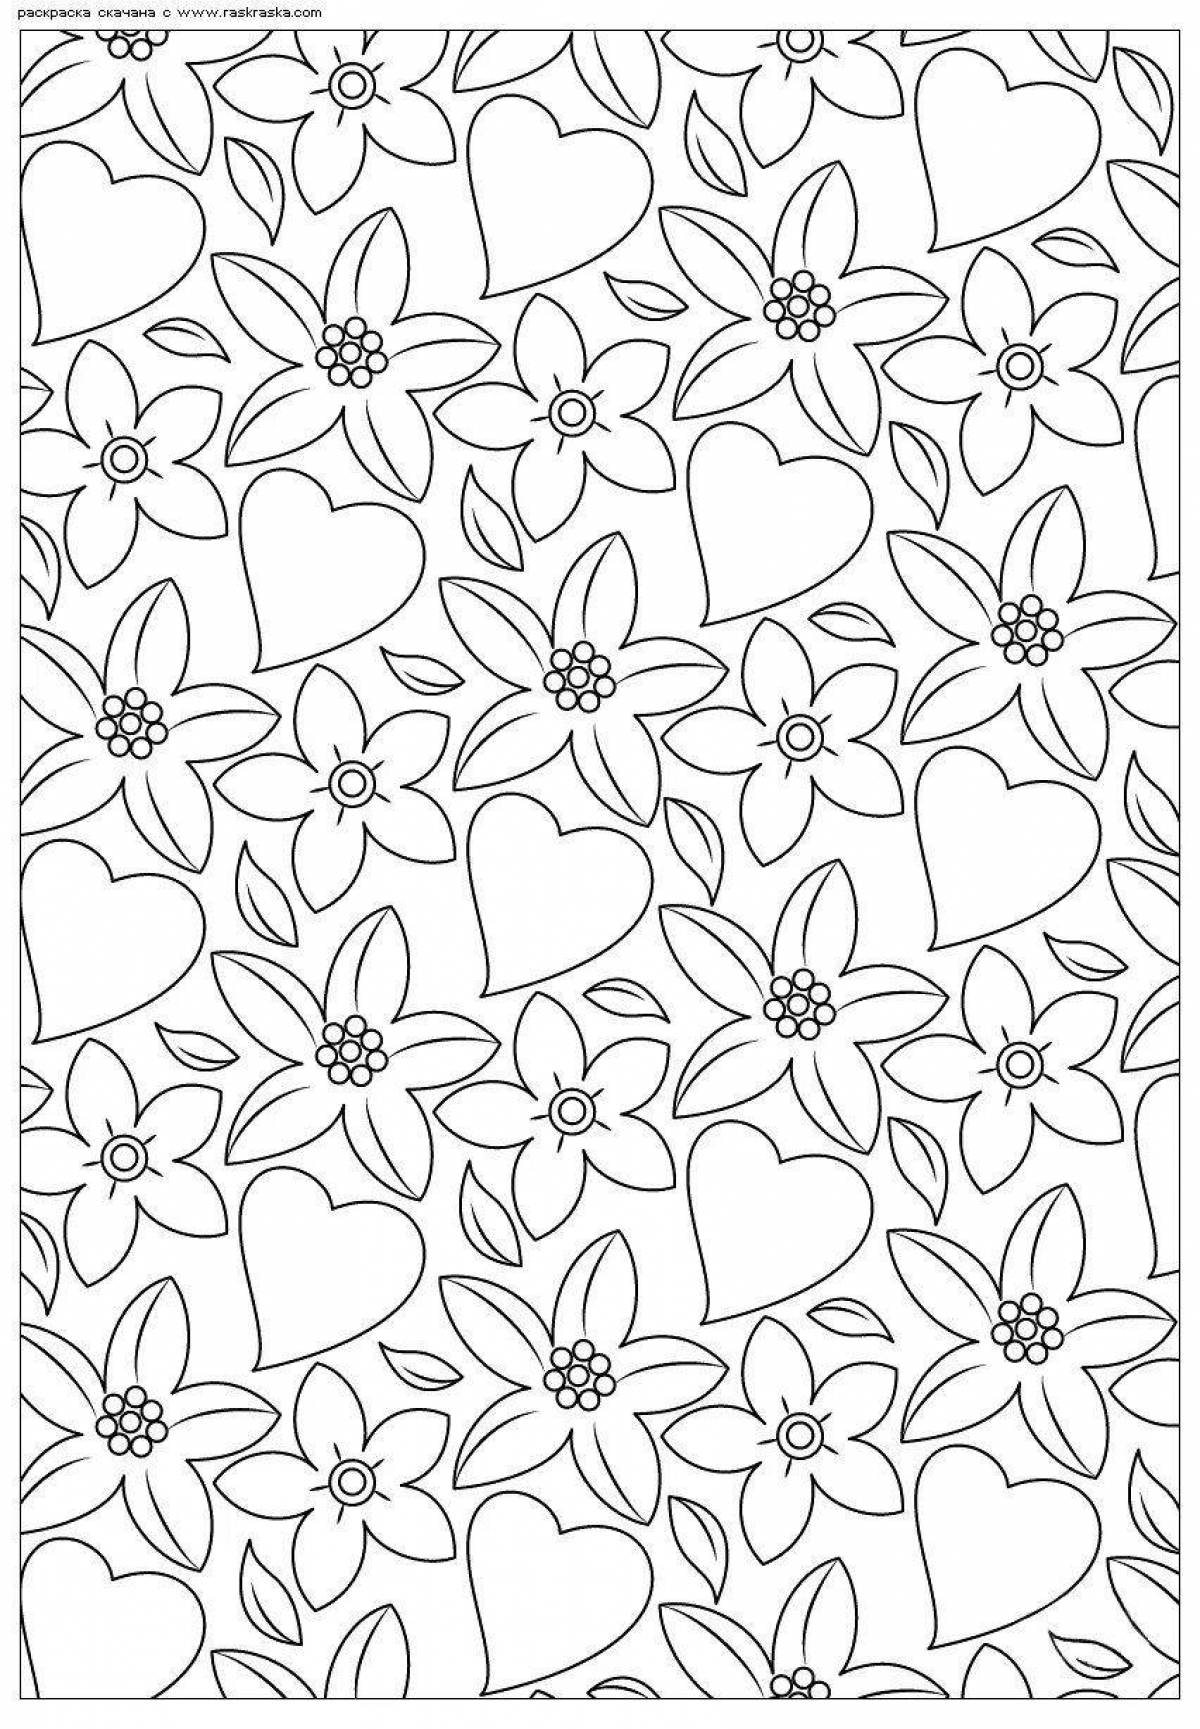 Small patterns for coloring in taste